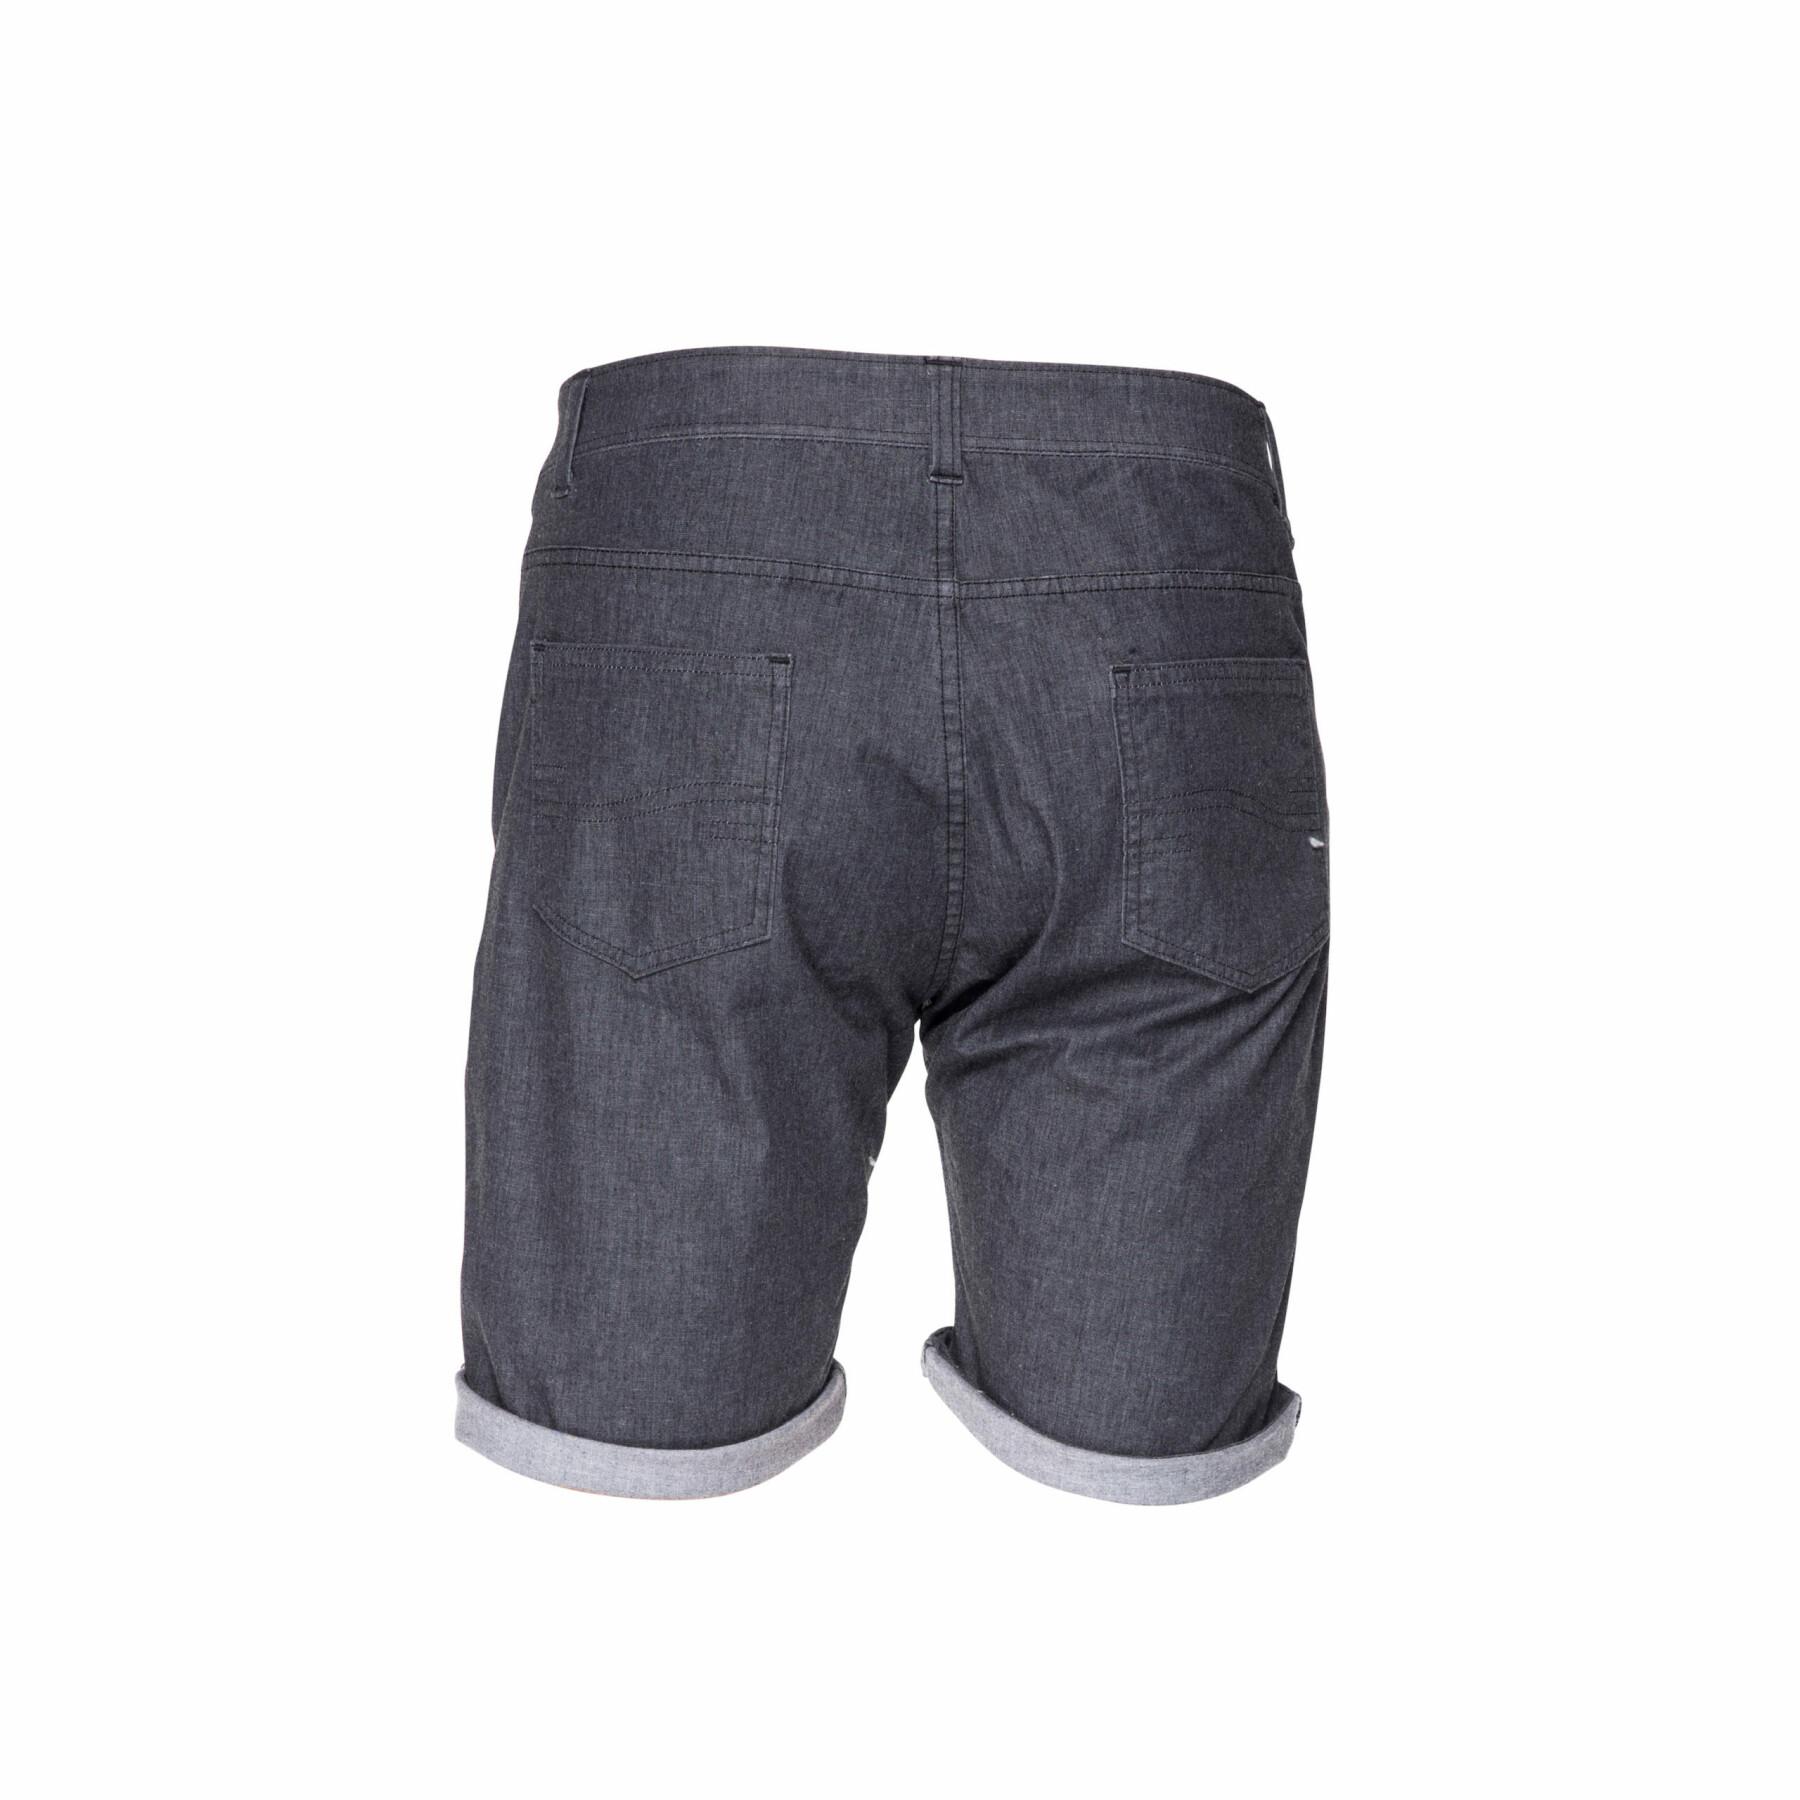 Jeansshorts med passform Snap Climbing